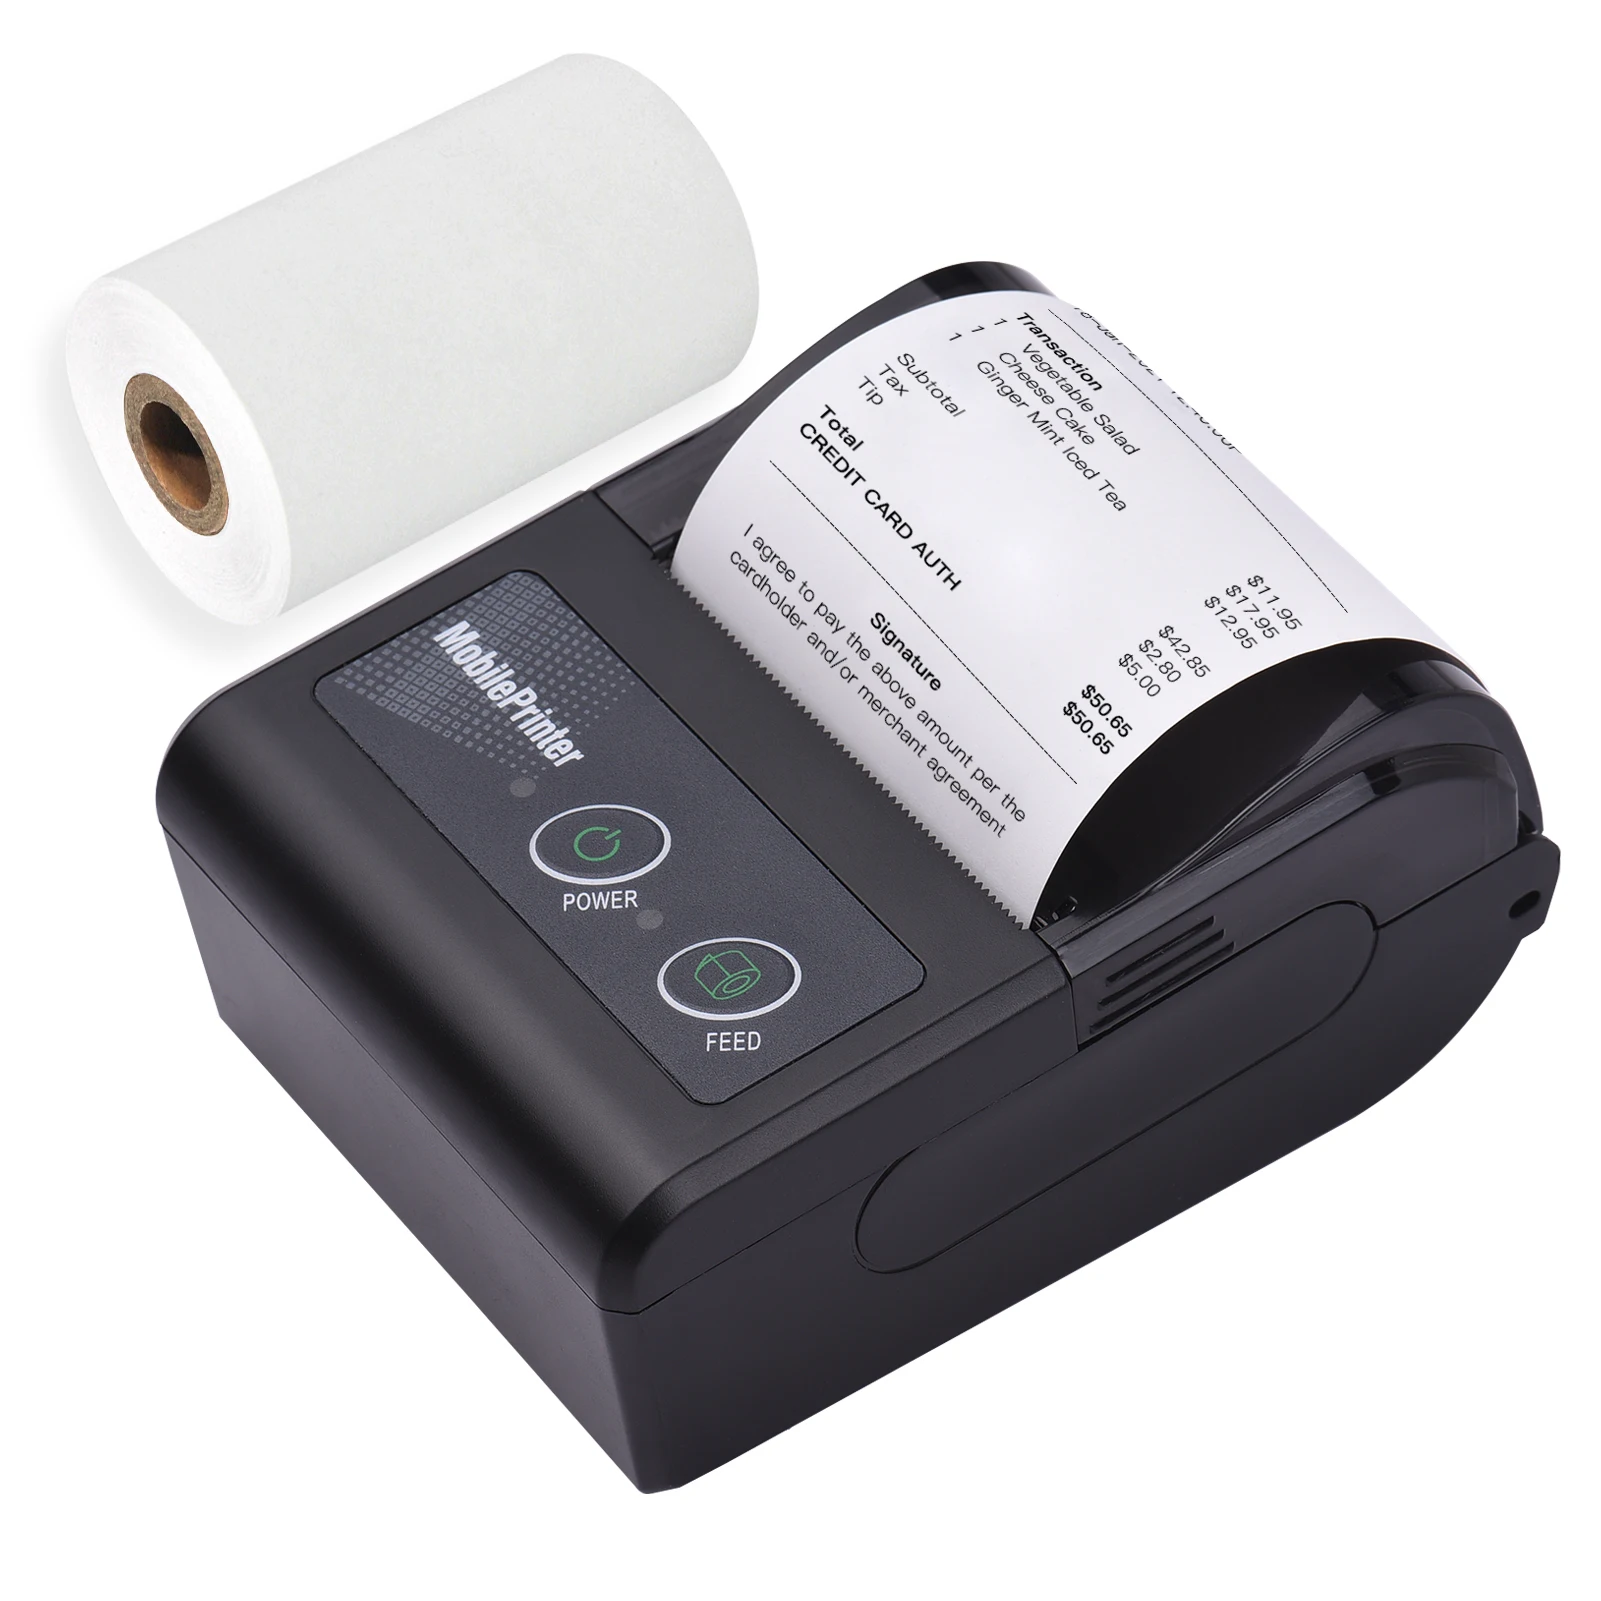 

58mm Mini Mobile POS Wireless Printer Portable 2 Inches BT Thermal Bill Receipt Printer Support ESC/POS Print Command for Store